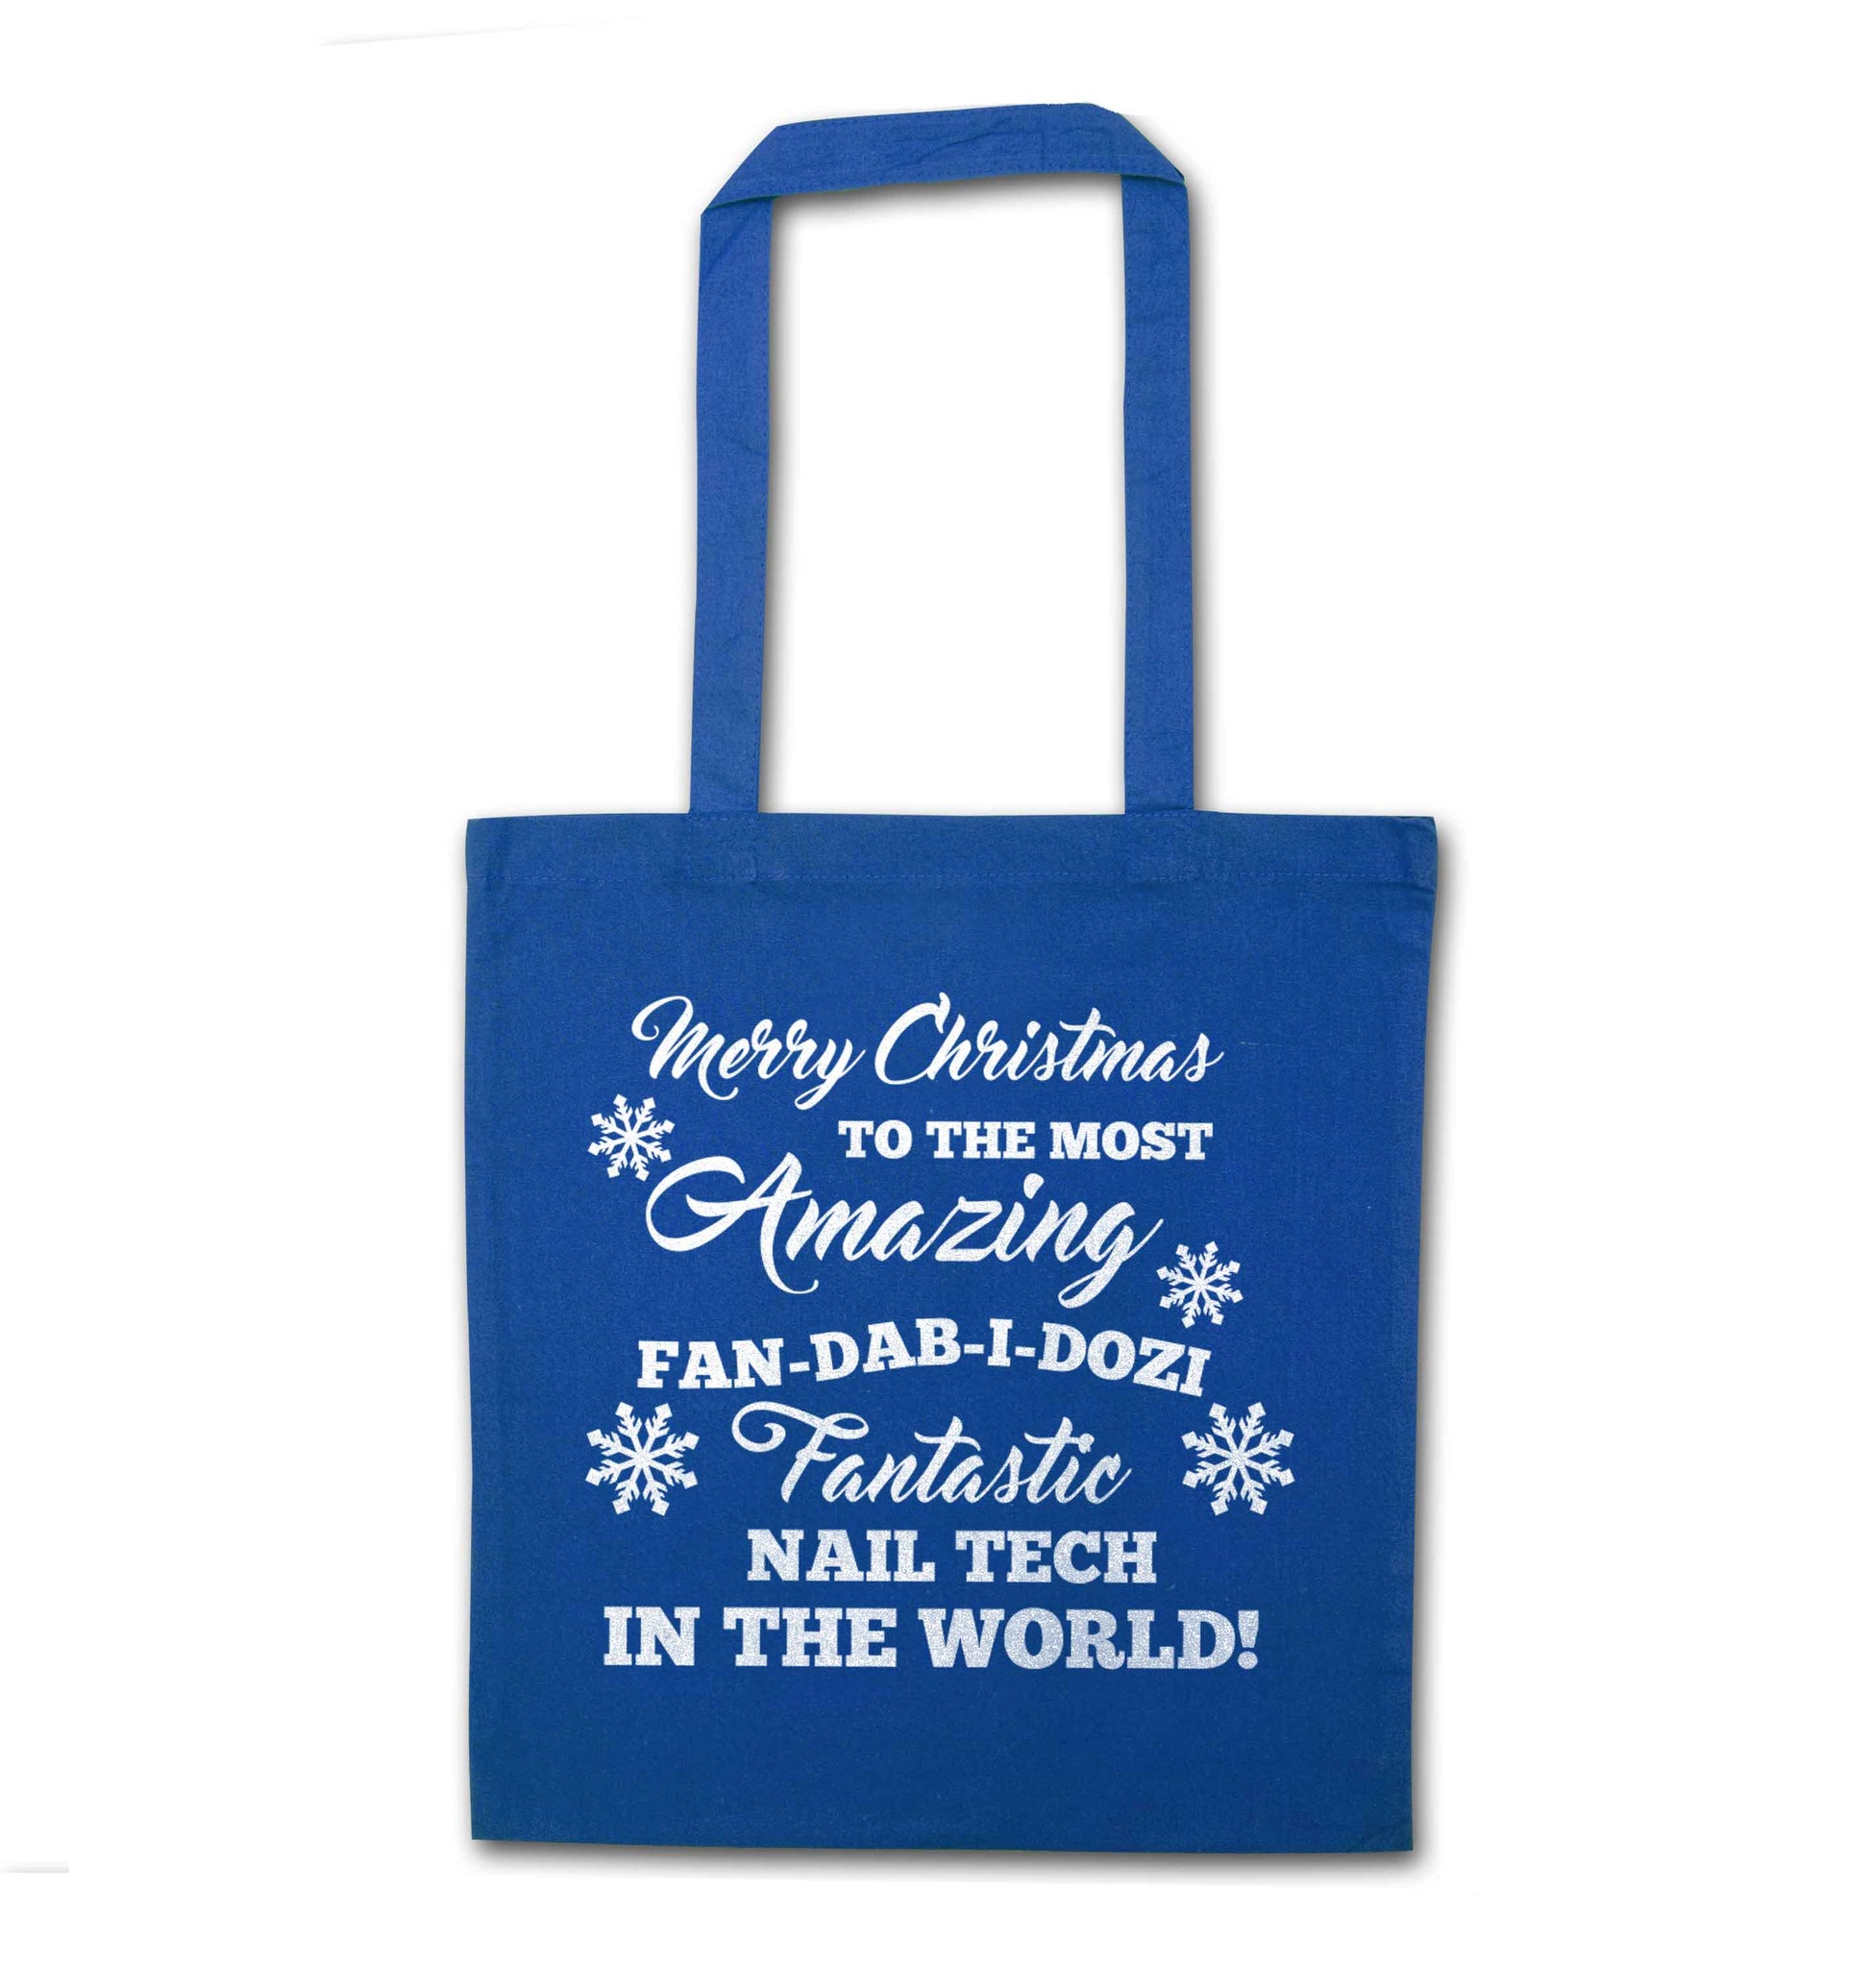 Merry Christmas to the most amazing fan-dab-i-dozi fantasic nail technician in the world blue tote bag